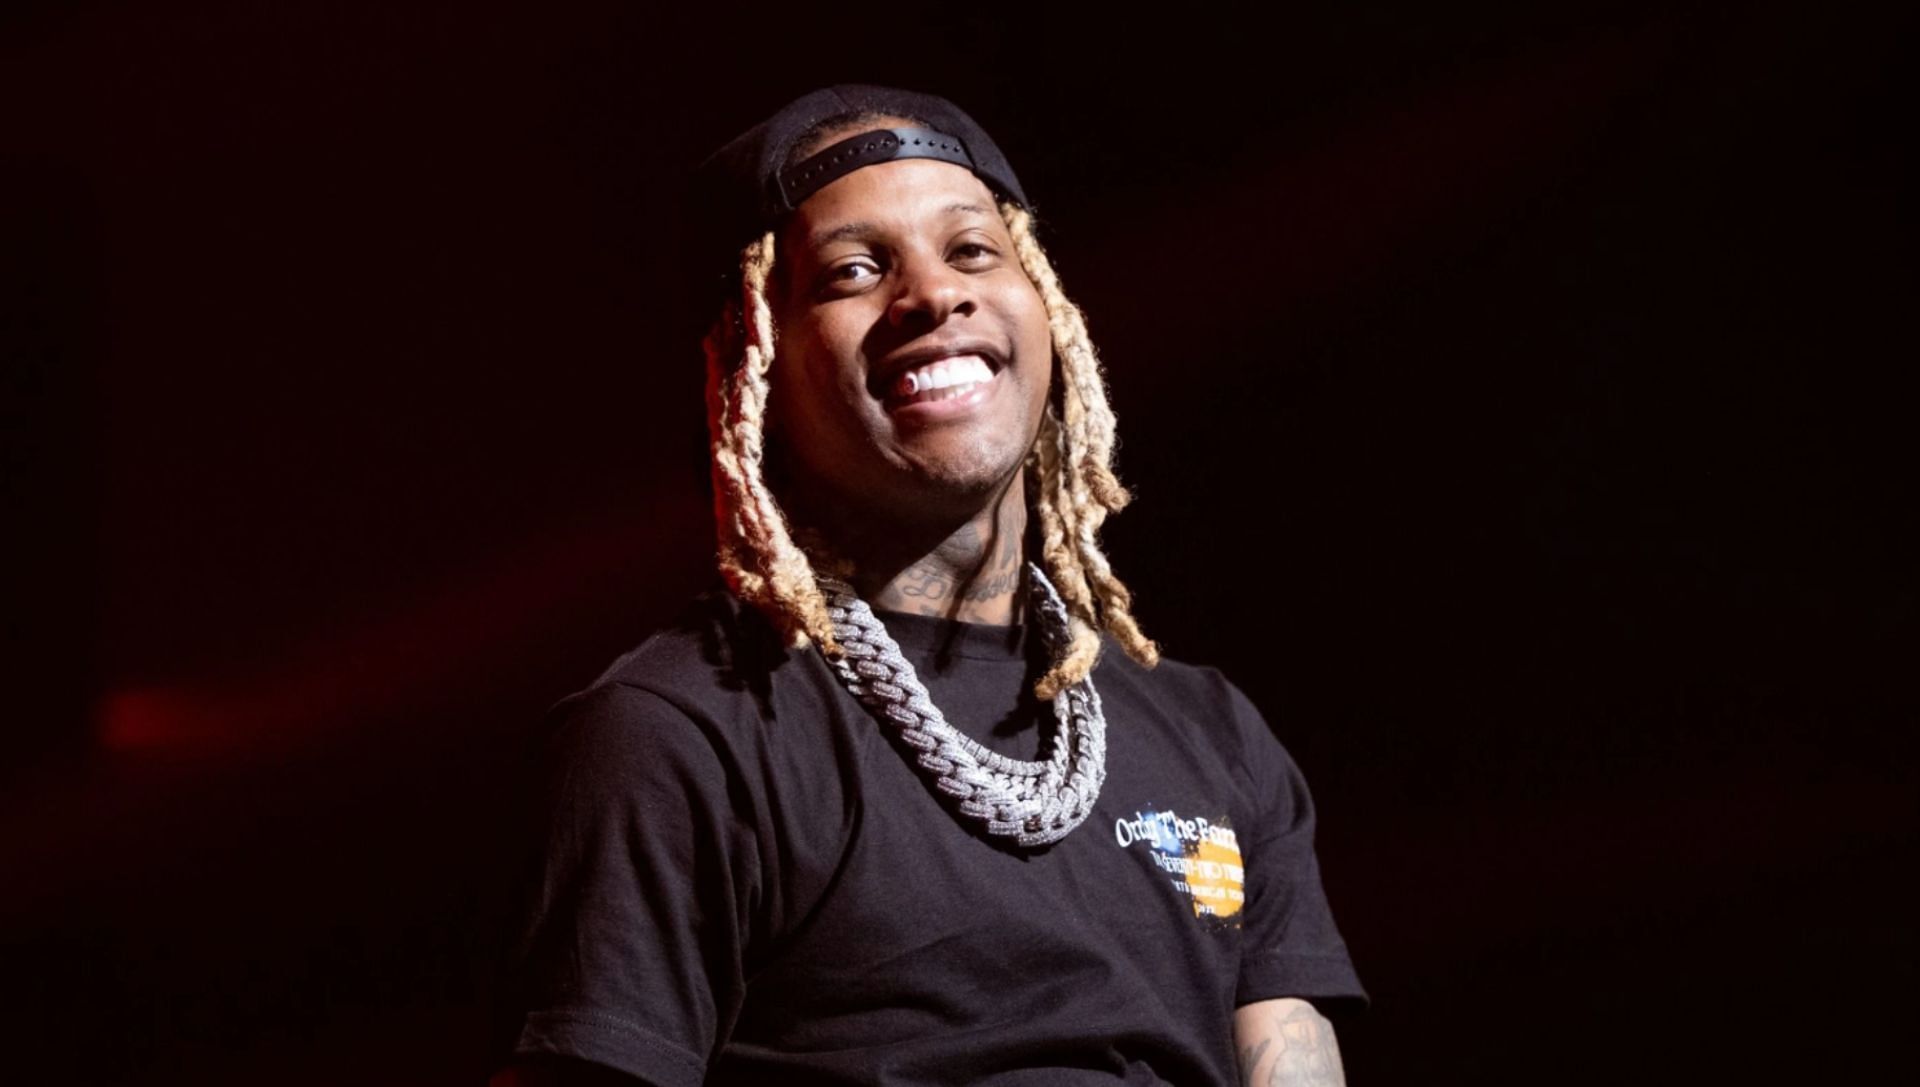 Lil Durk Tour 2022 Tickets, presale, where to buy, dates and more